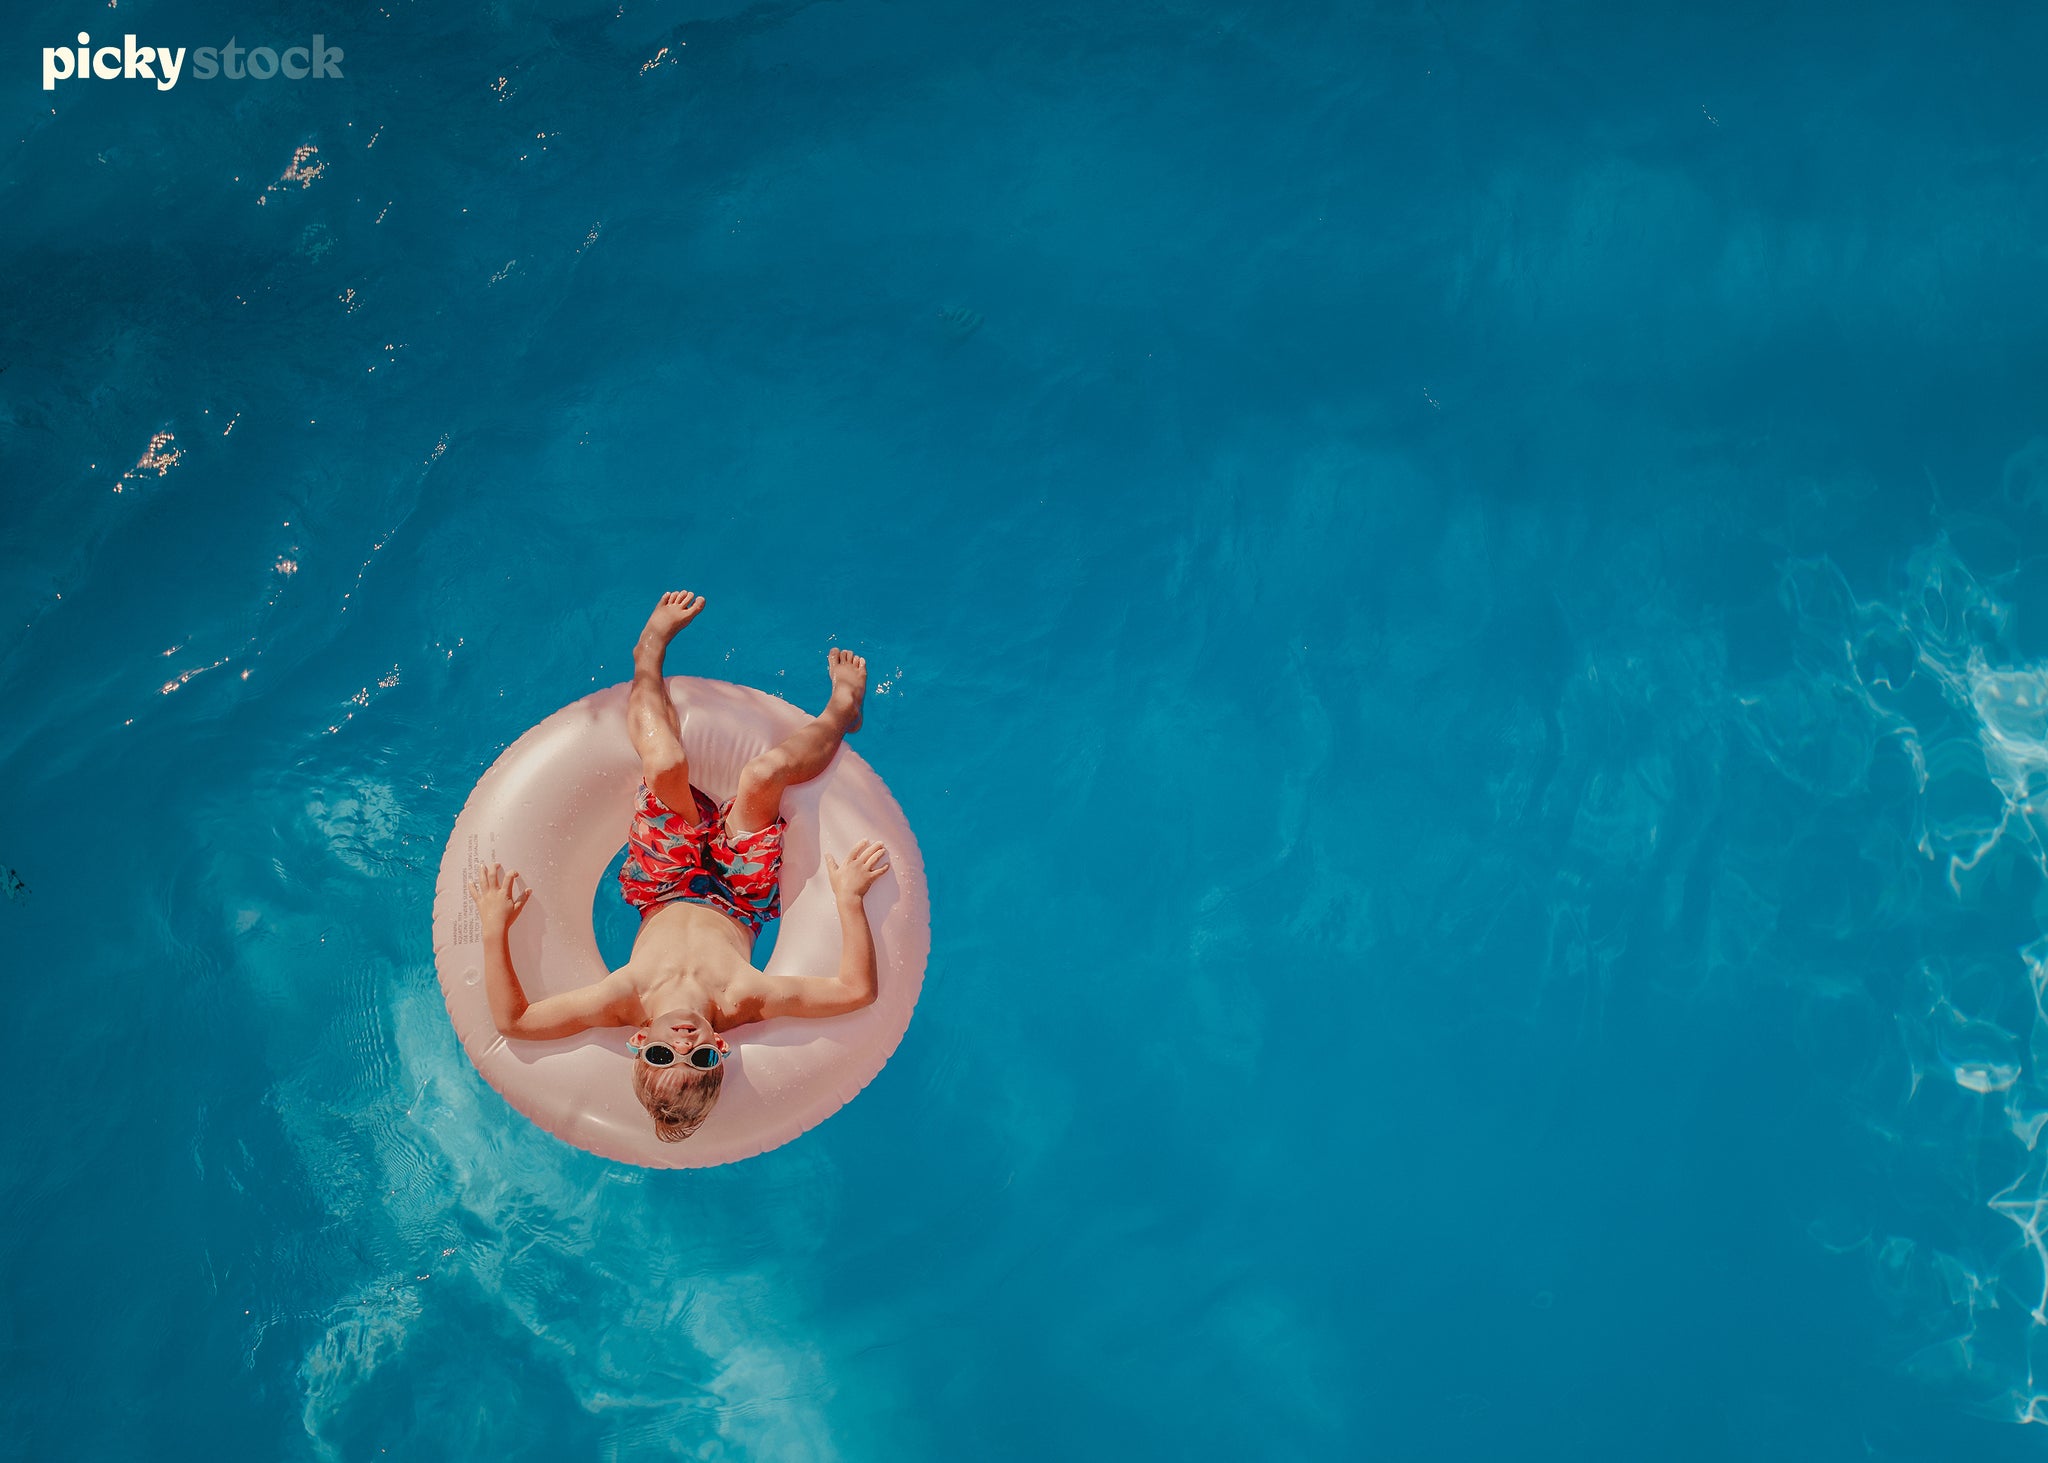 Overhead shot of a small boy with blonde hair in a swimming pool on a soft pink inflatable ring. Boy wearing red board shorts swimming togs trunks. Water is bright blue. Boy is looking up to camera wearing sunglasses